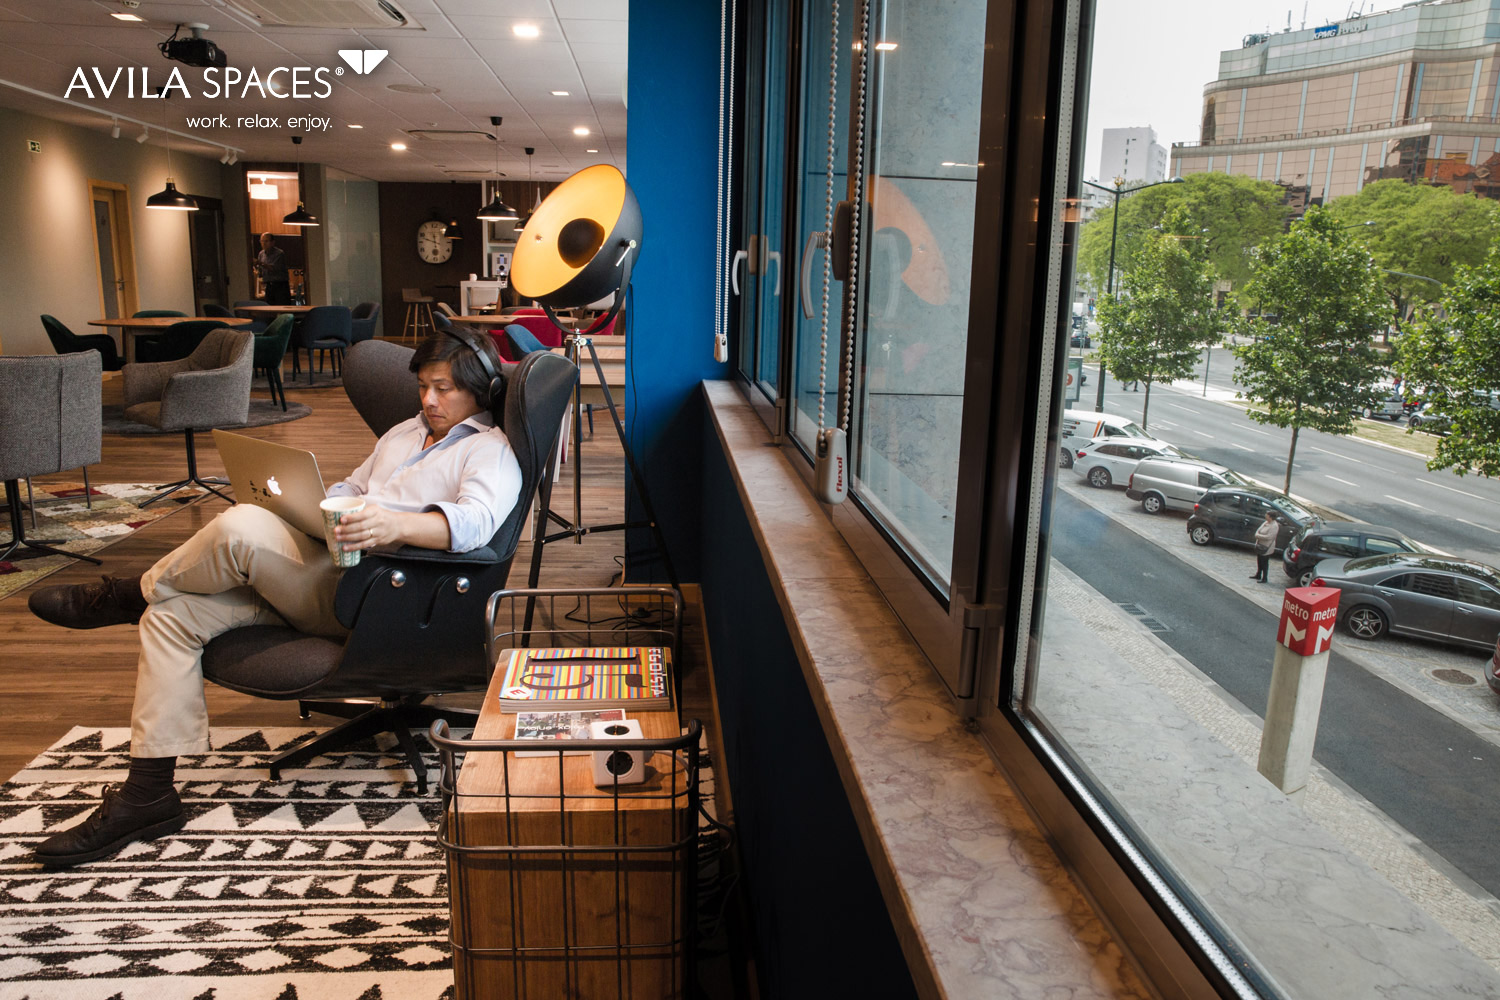 Relax at Avila Spaces, the best coworking space in Lisbon